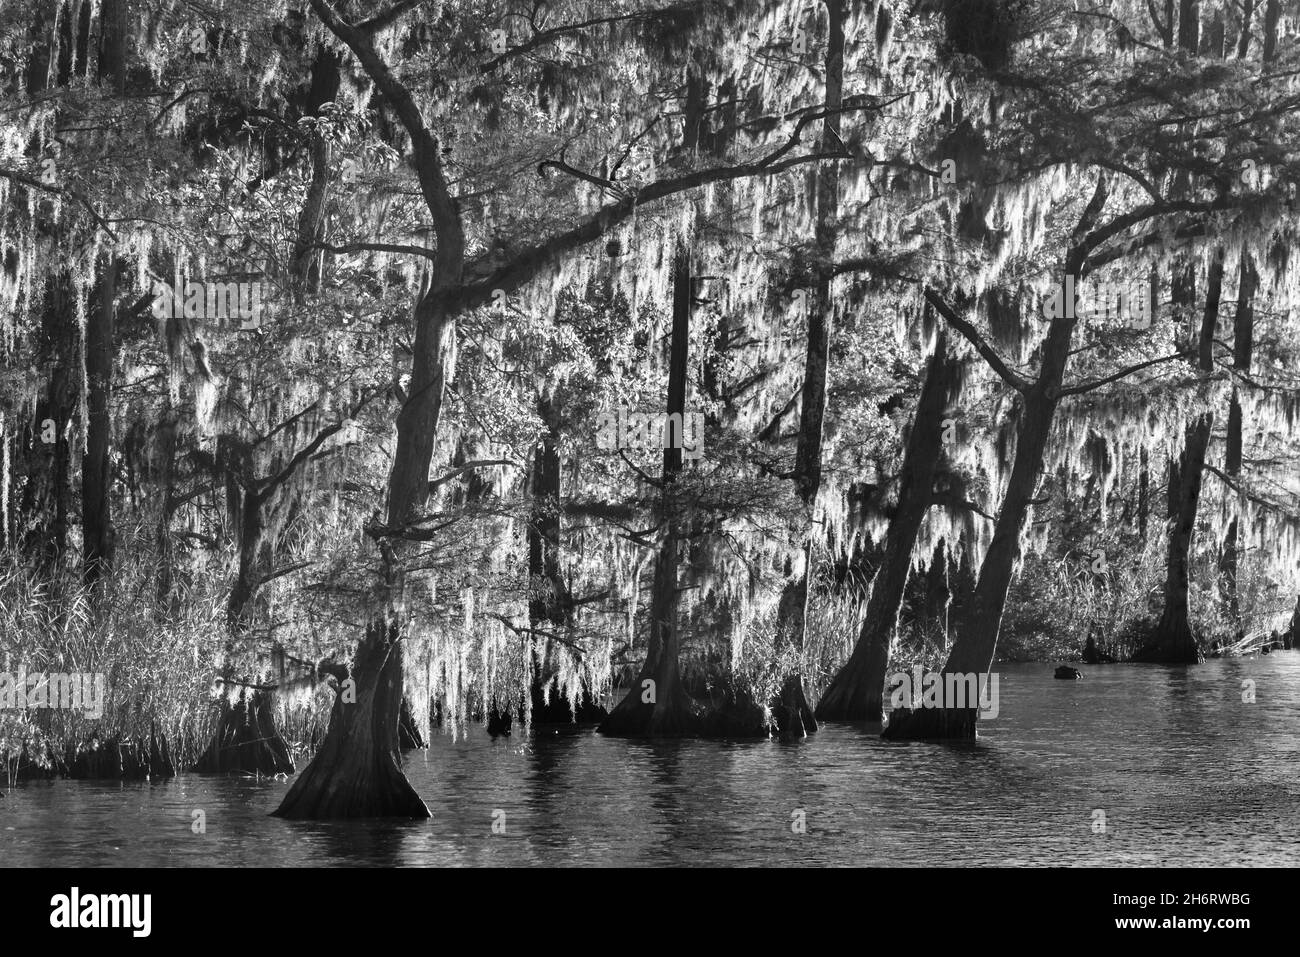 Cypress trees line the banks of the Tensaw River at historic Blakeley State Park near Spanish Fort, Alabama. Stock Photo